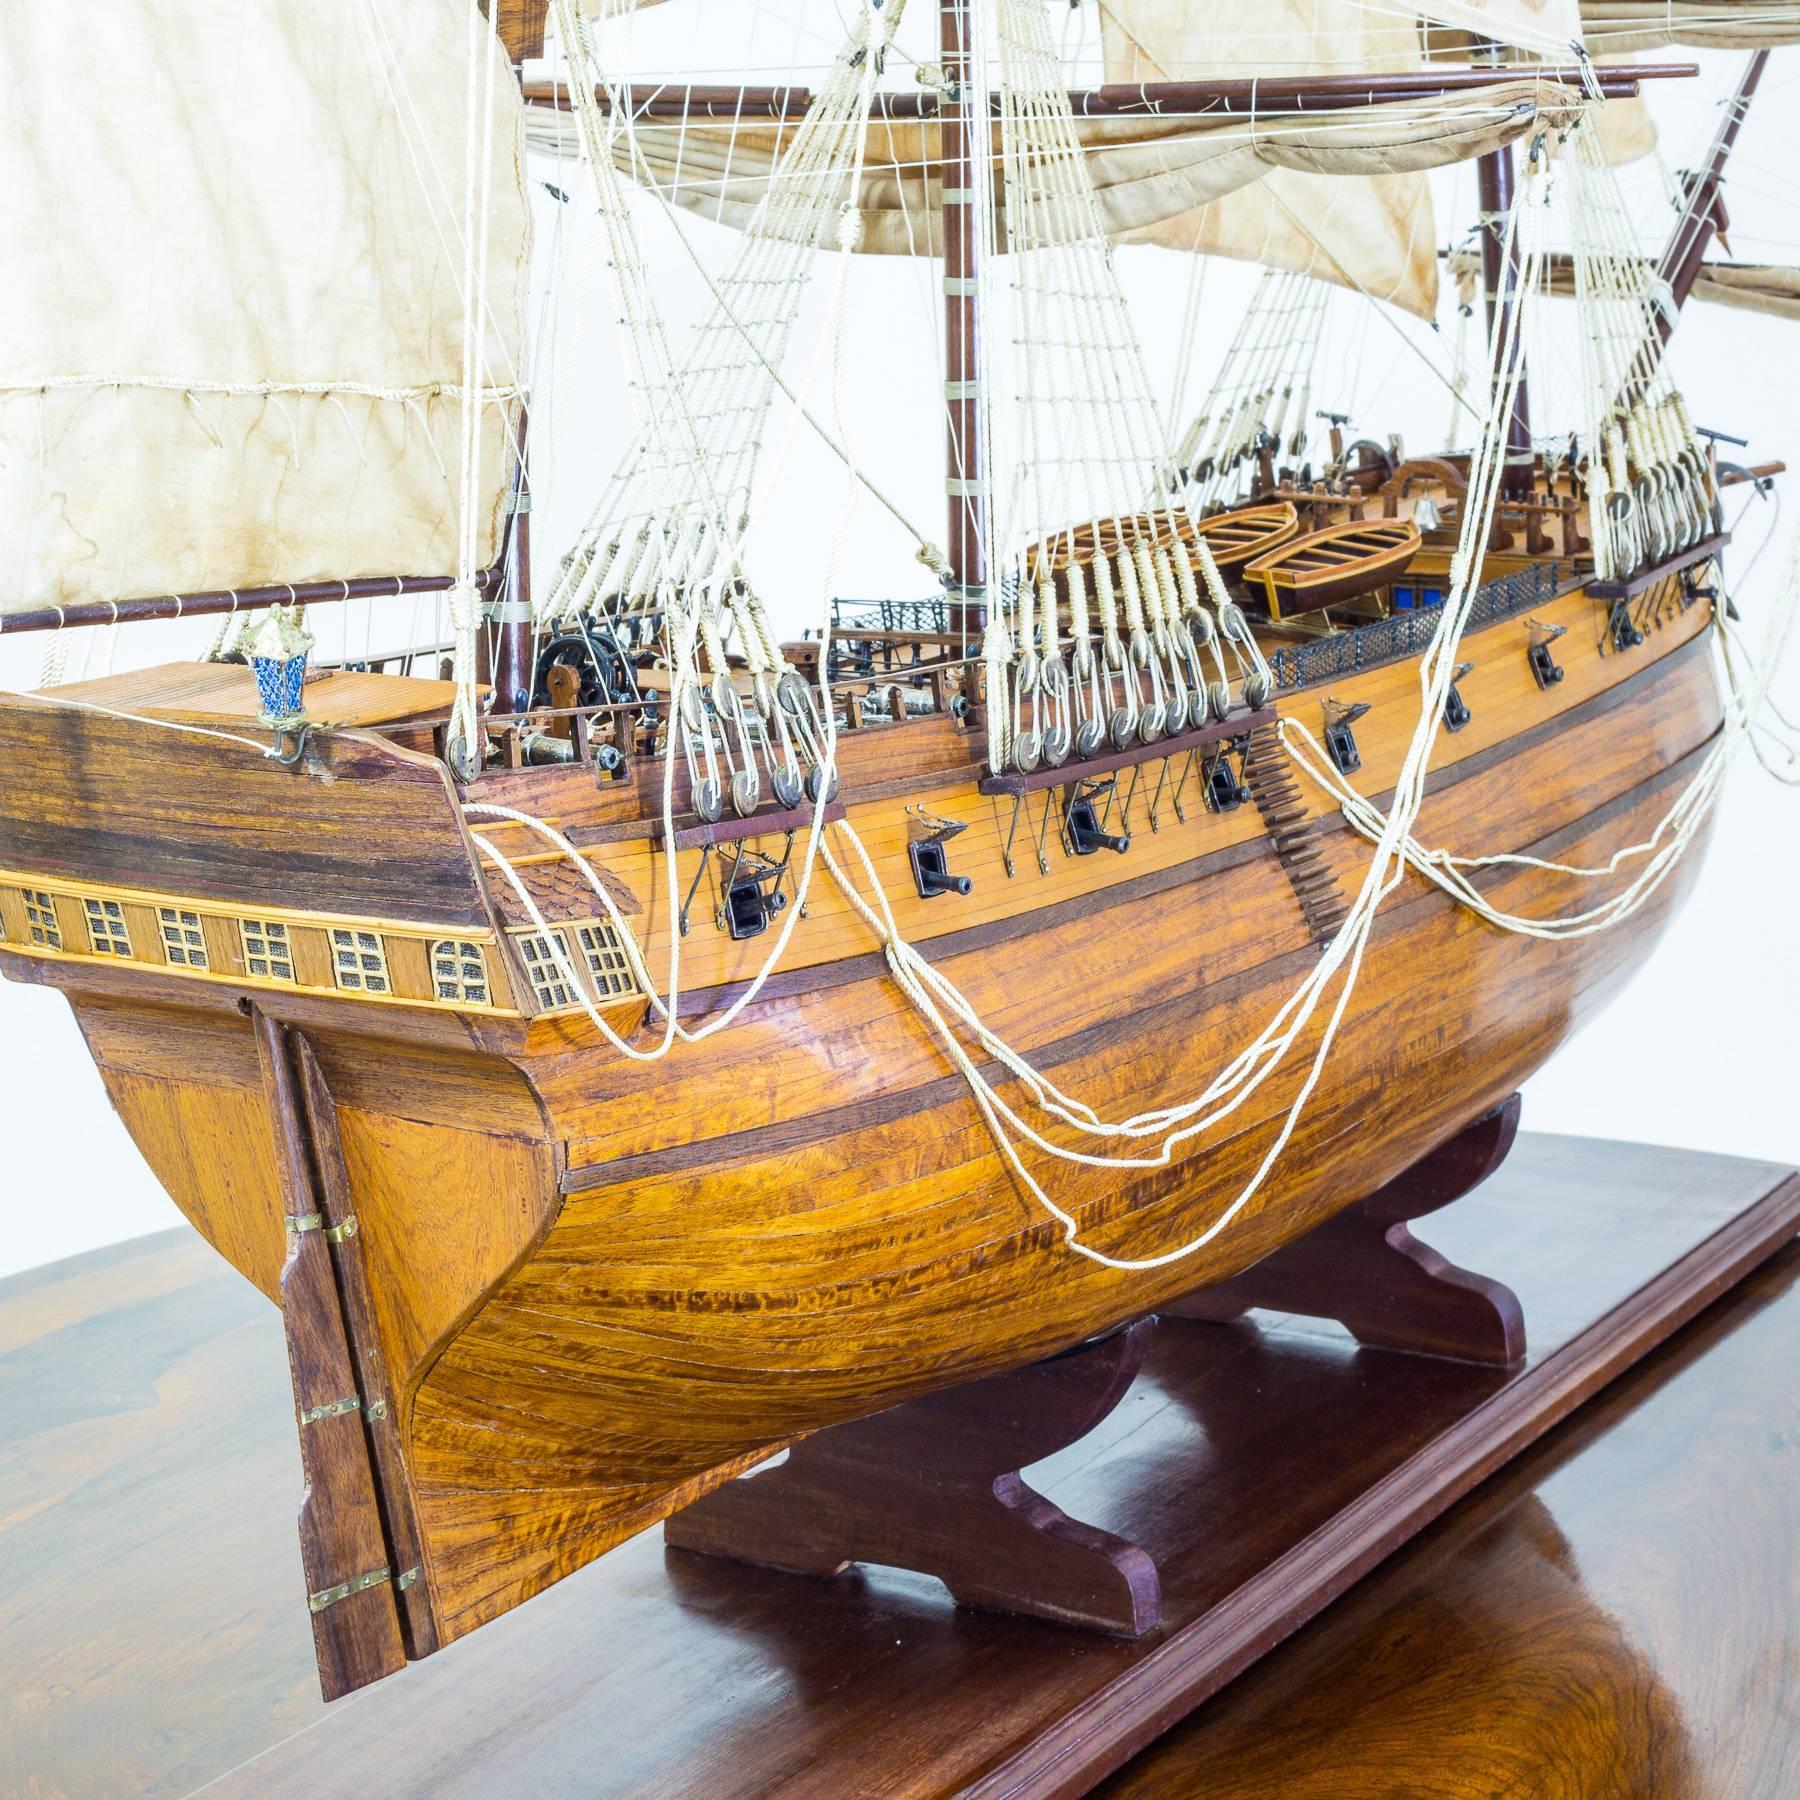 Late 18th Century A Fine Early 20th Century Large Antique Ship Model of HMS Pandora, 1779